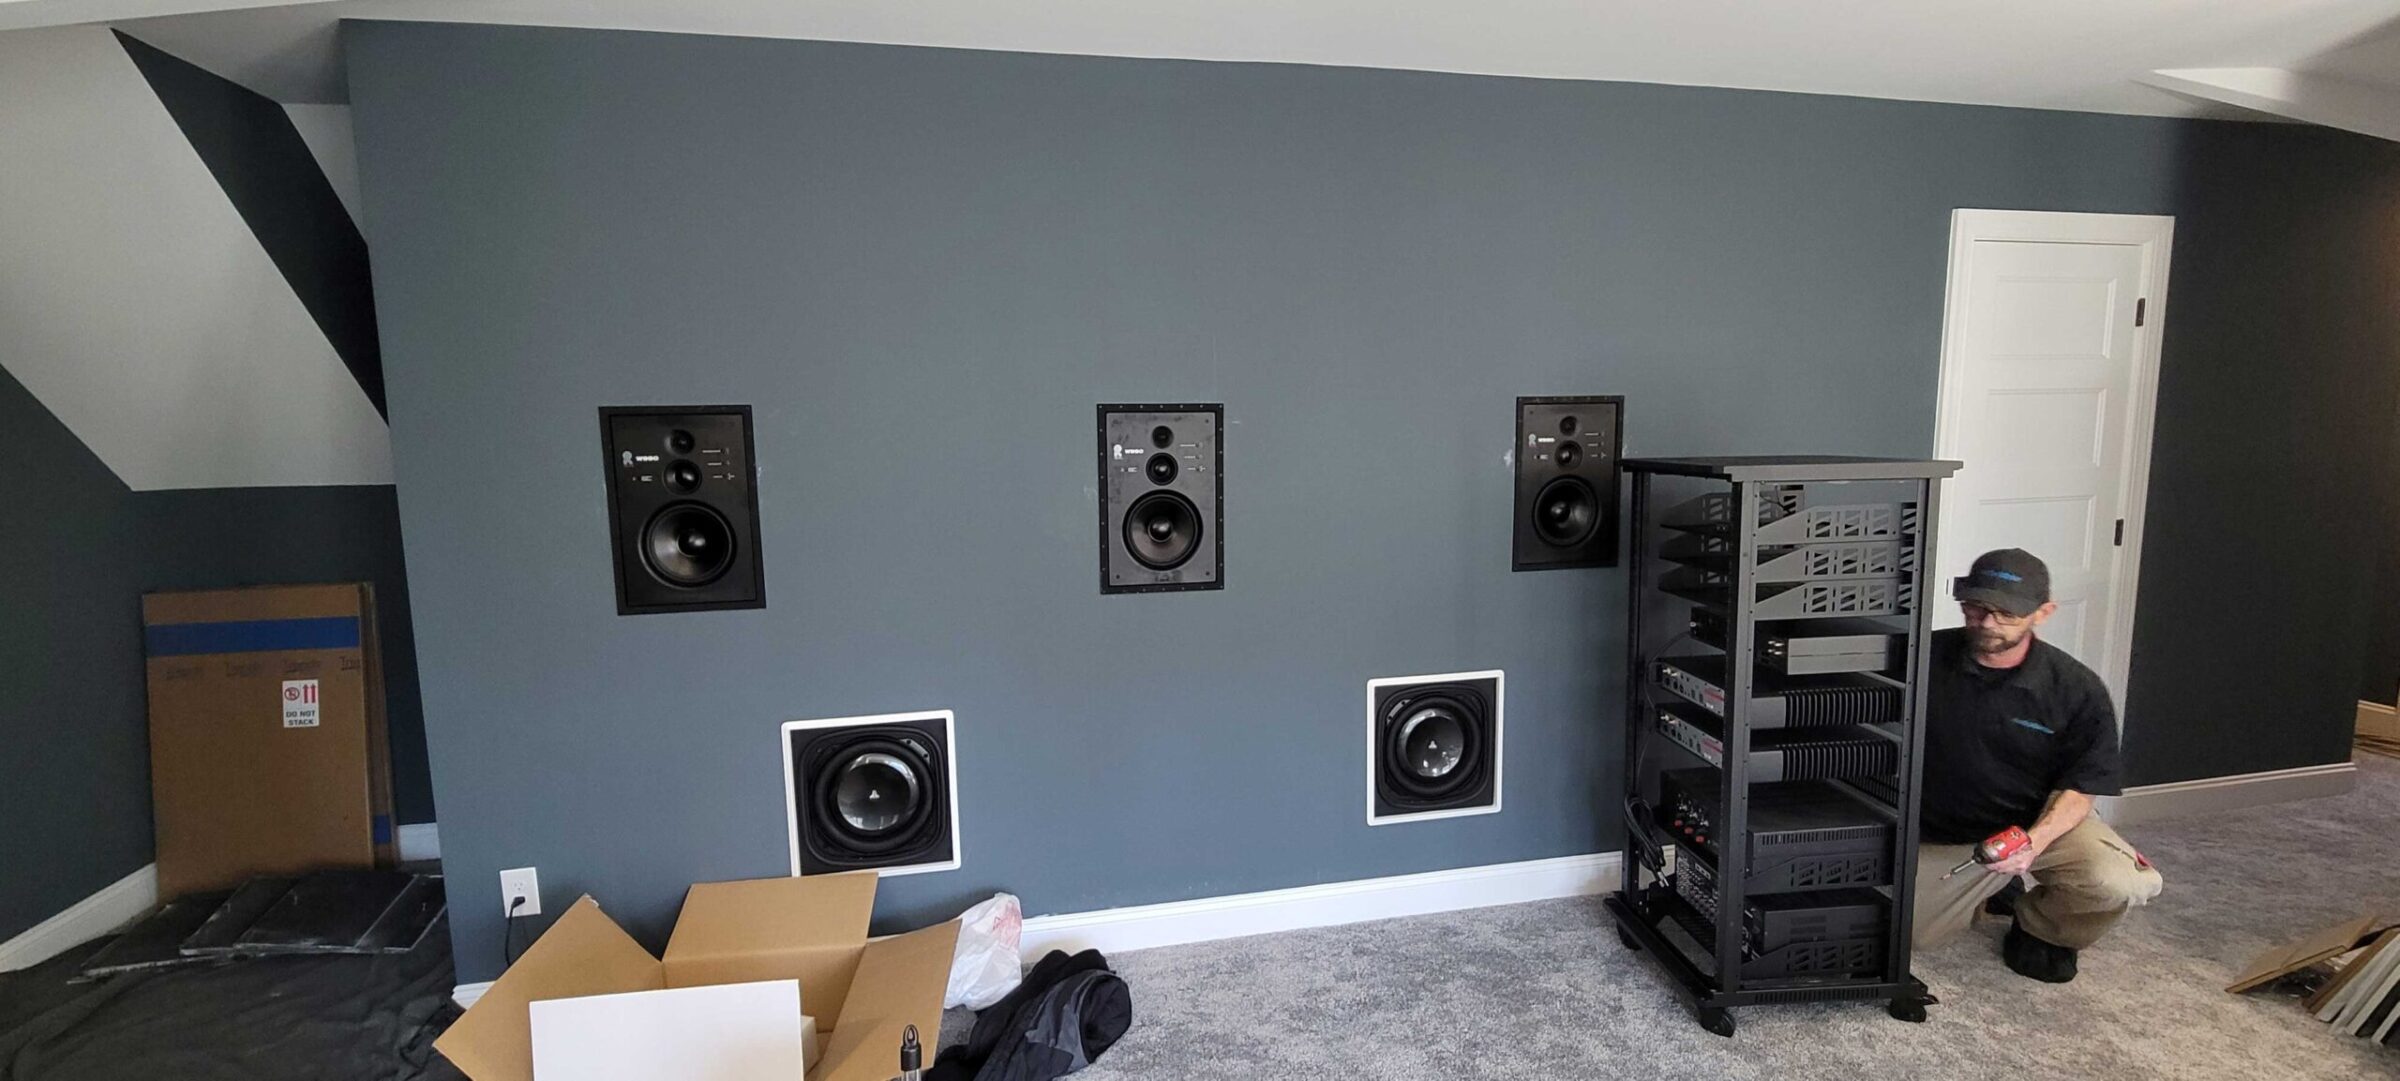 Revel In-Wall Speakers & JL In-Wall Subs installed in home theater before the screen goes up